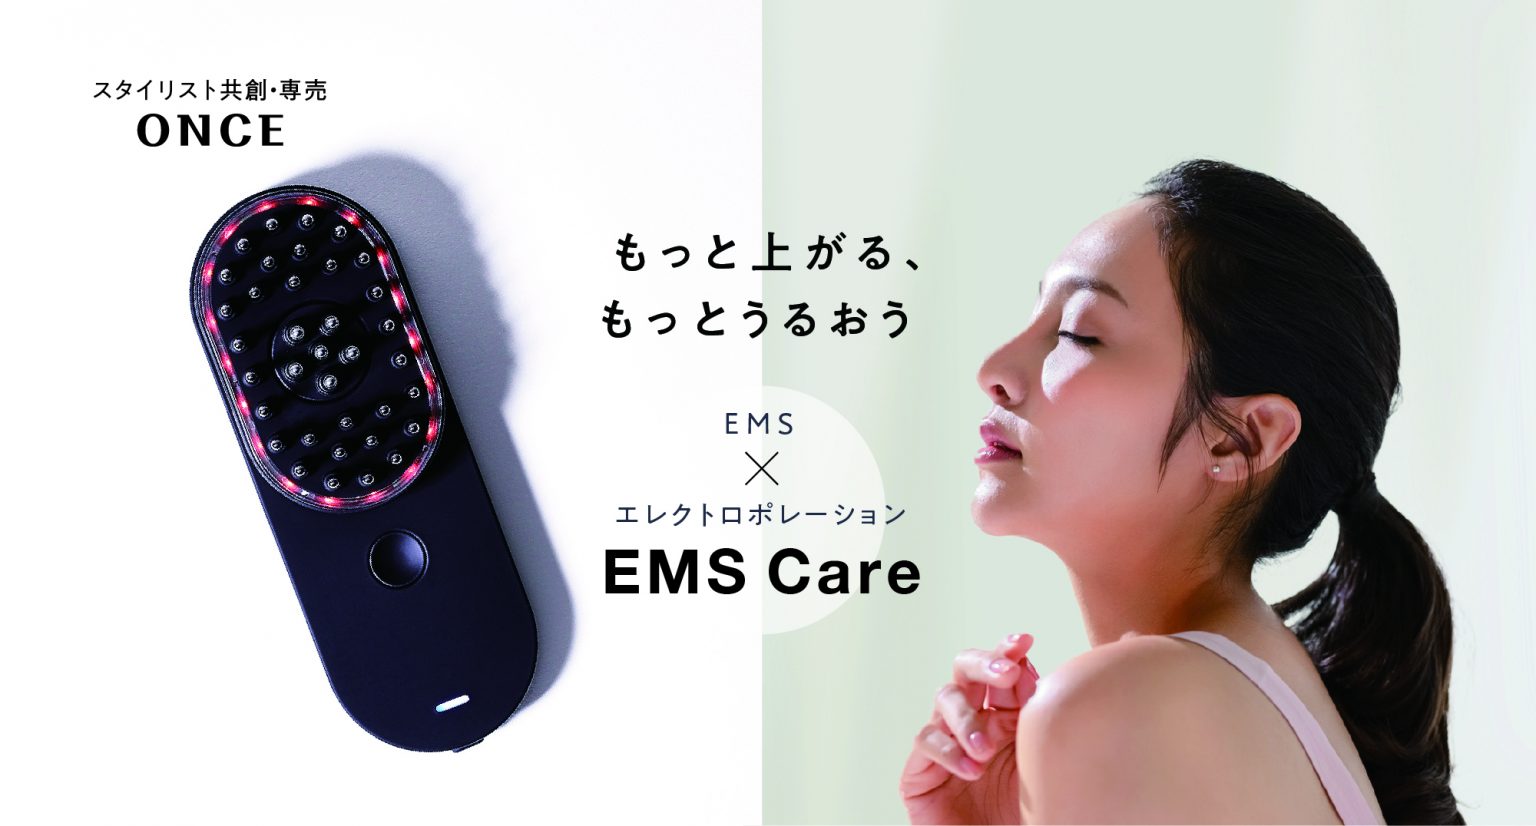 ONCE EMS Care デンキバリブラシ - 美容機器